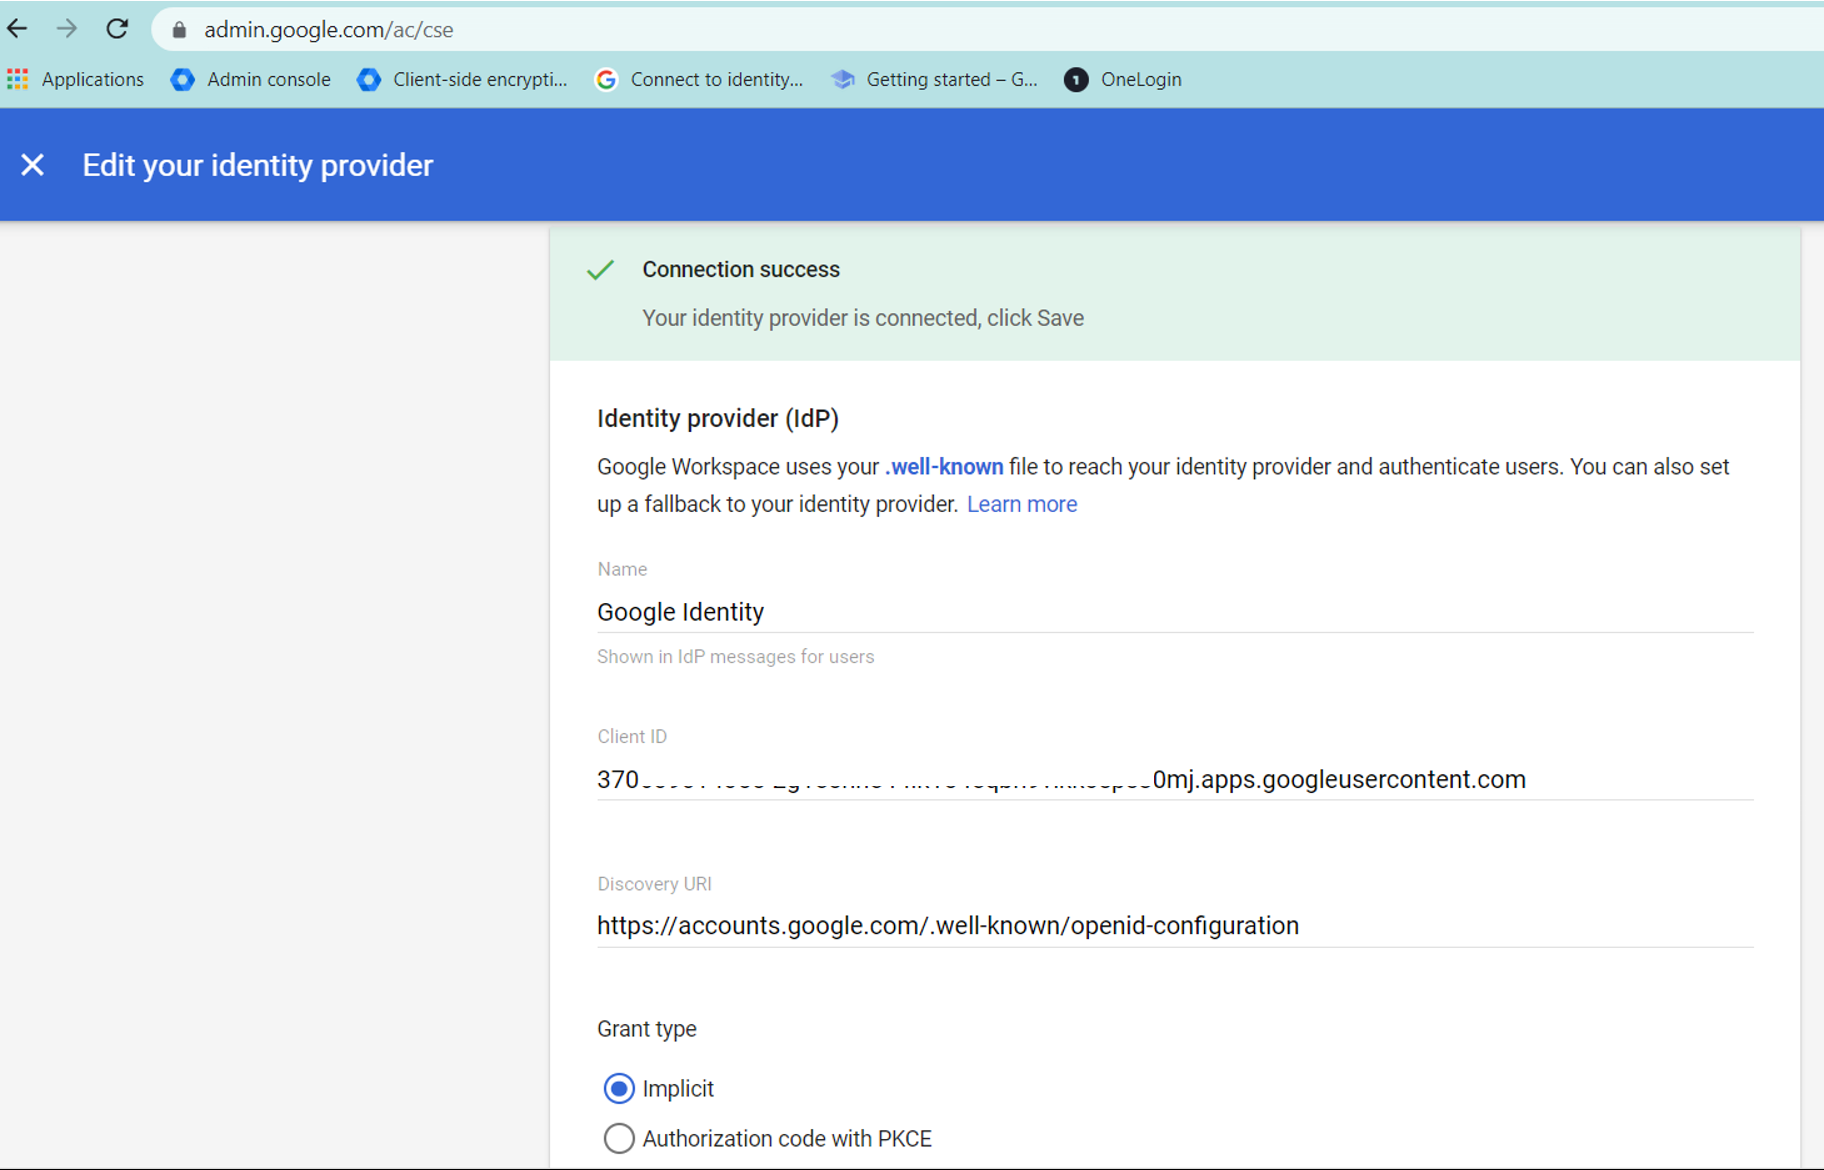 Configuration window for the identity provider in the Google administration console